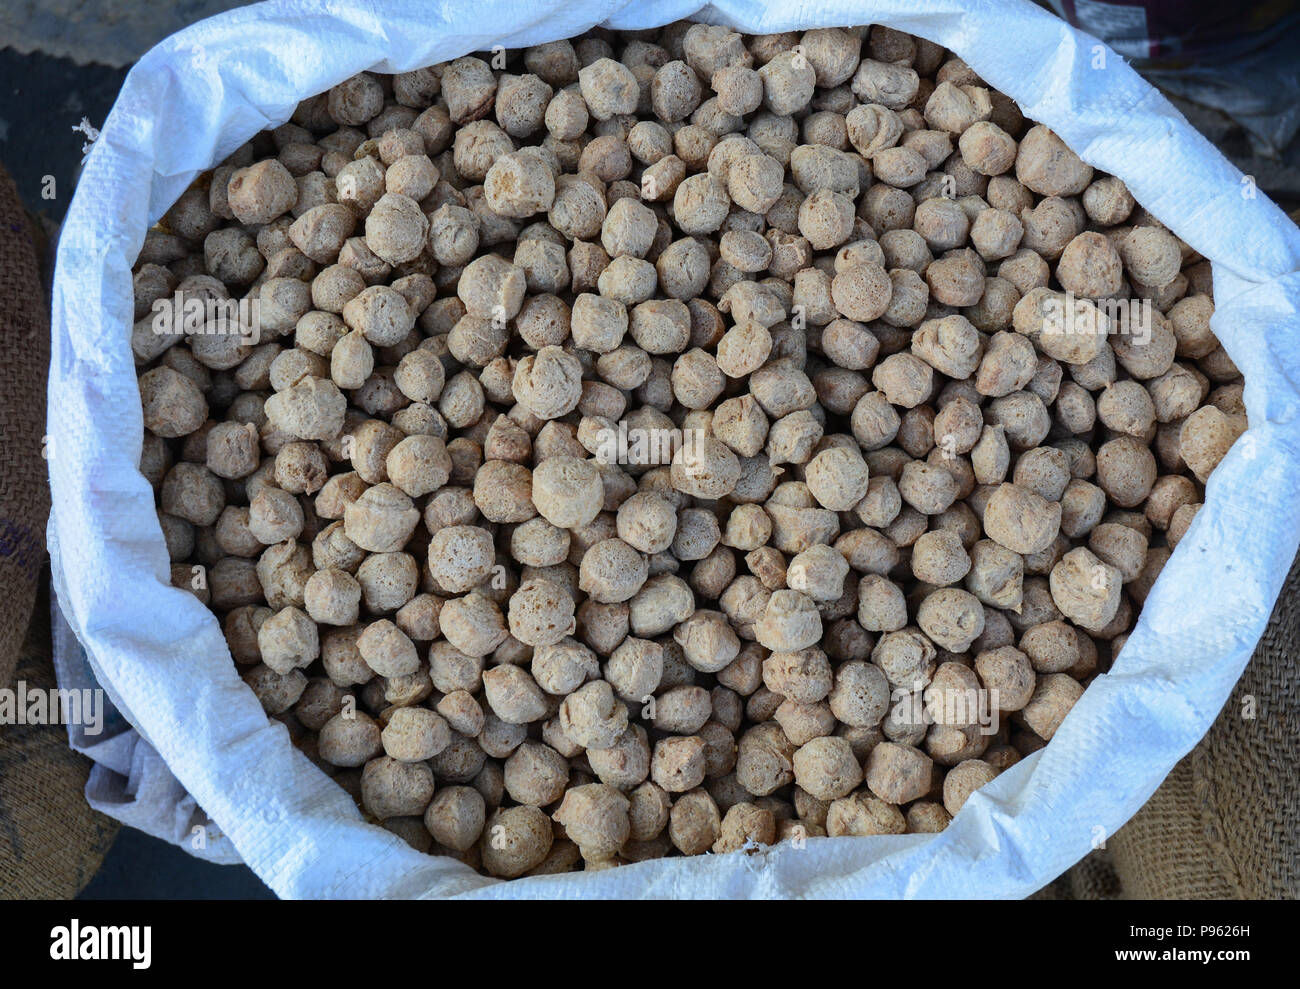 Dried food for sale at rural market in Kashmir, India. Stock Photo